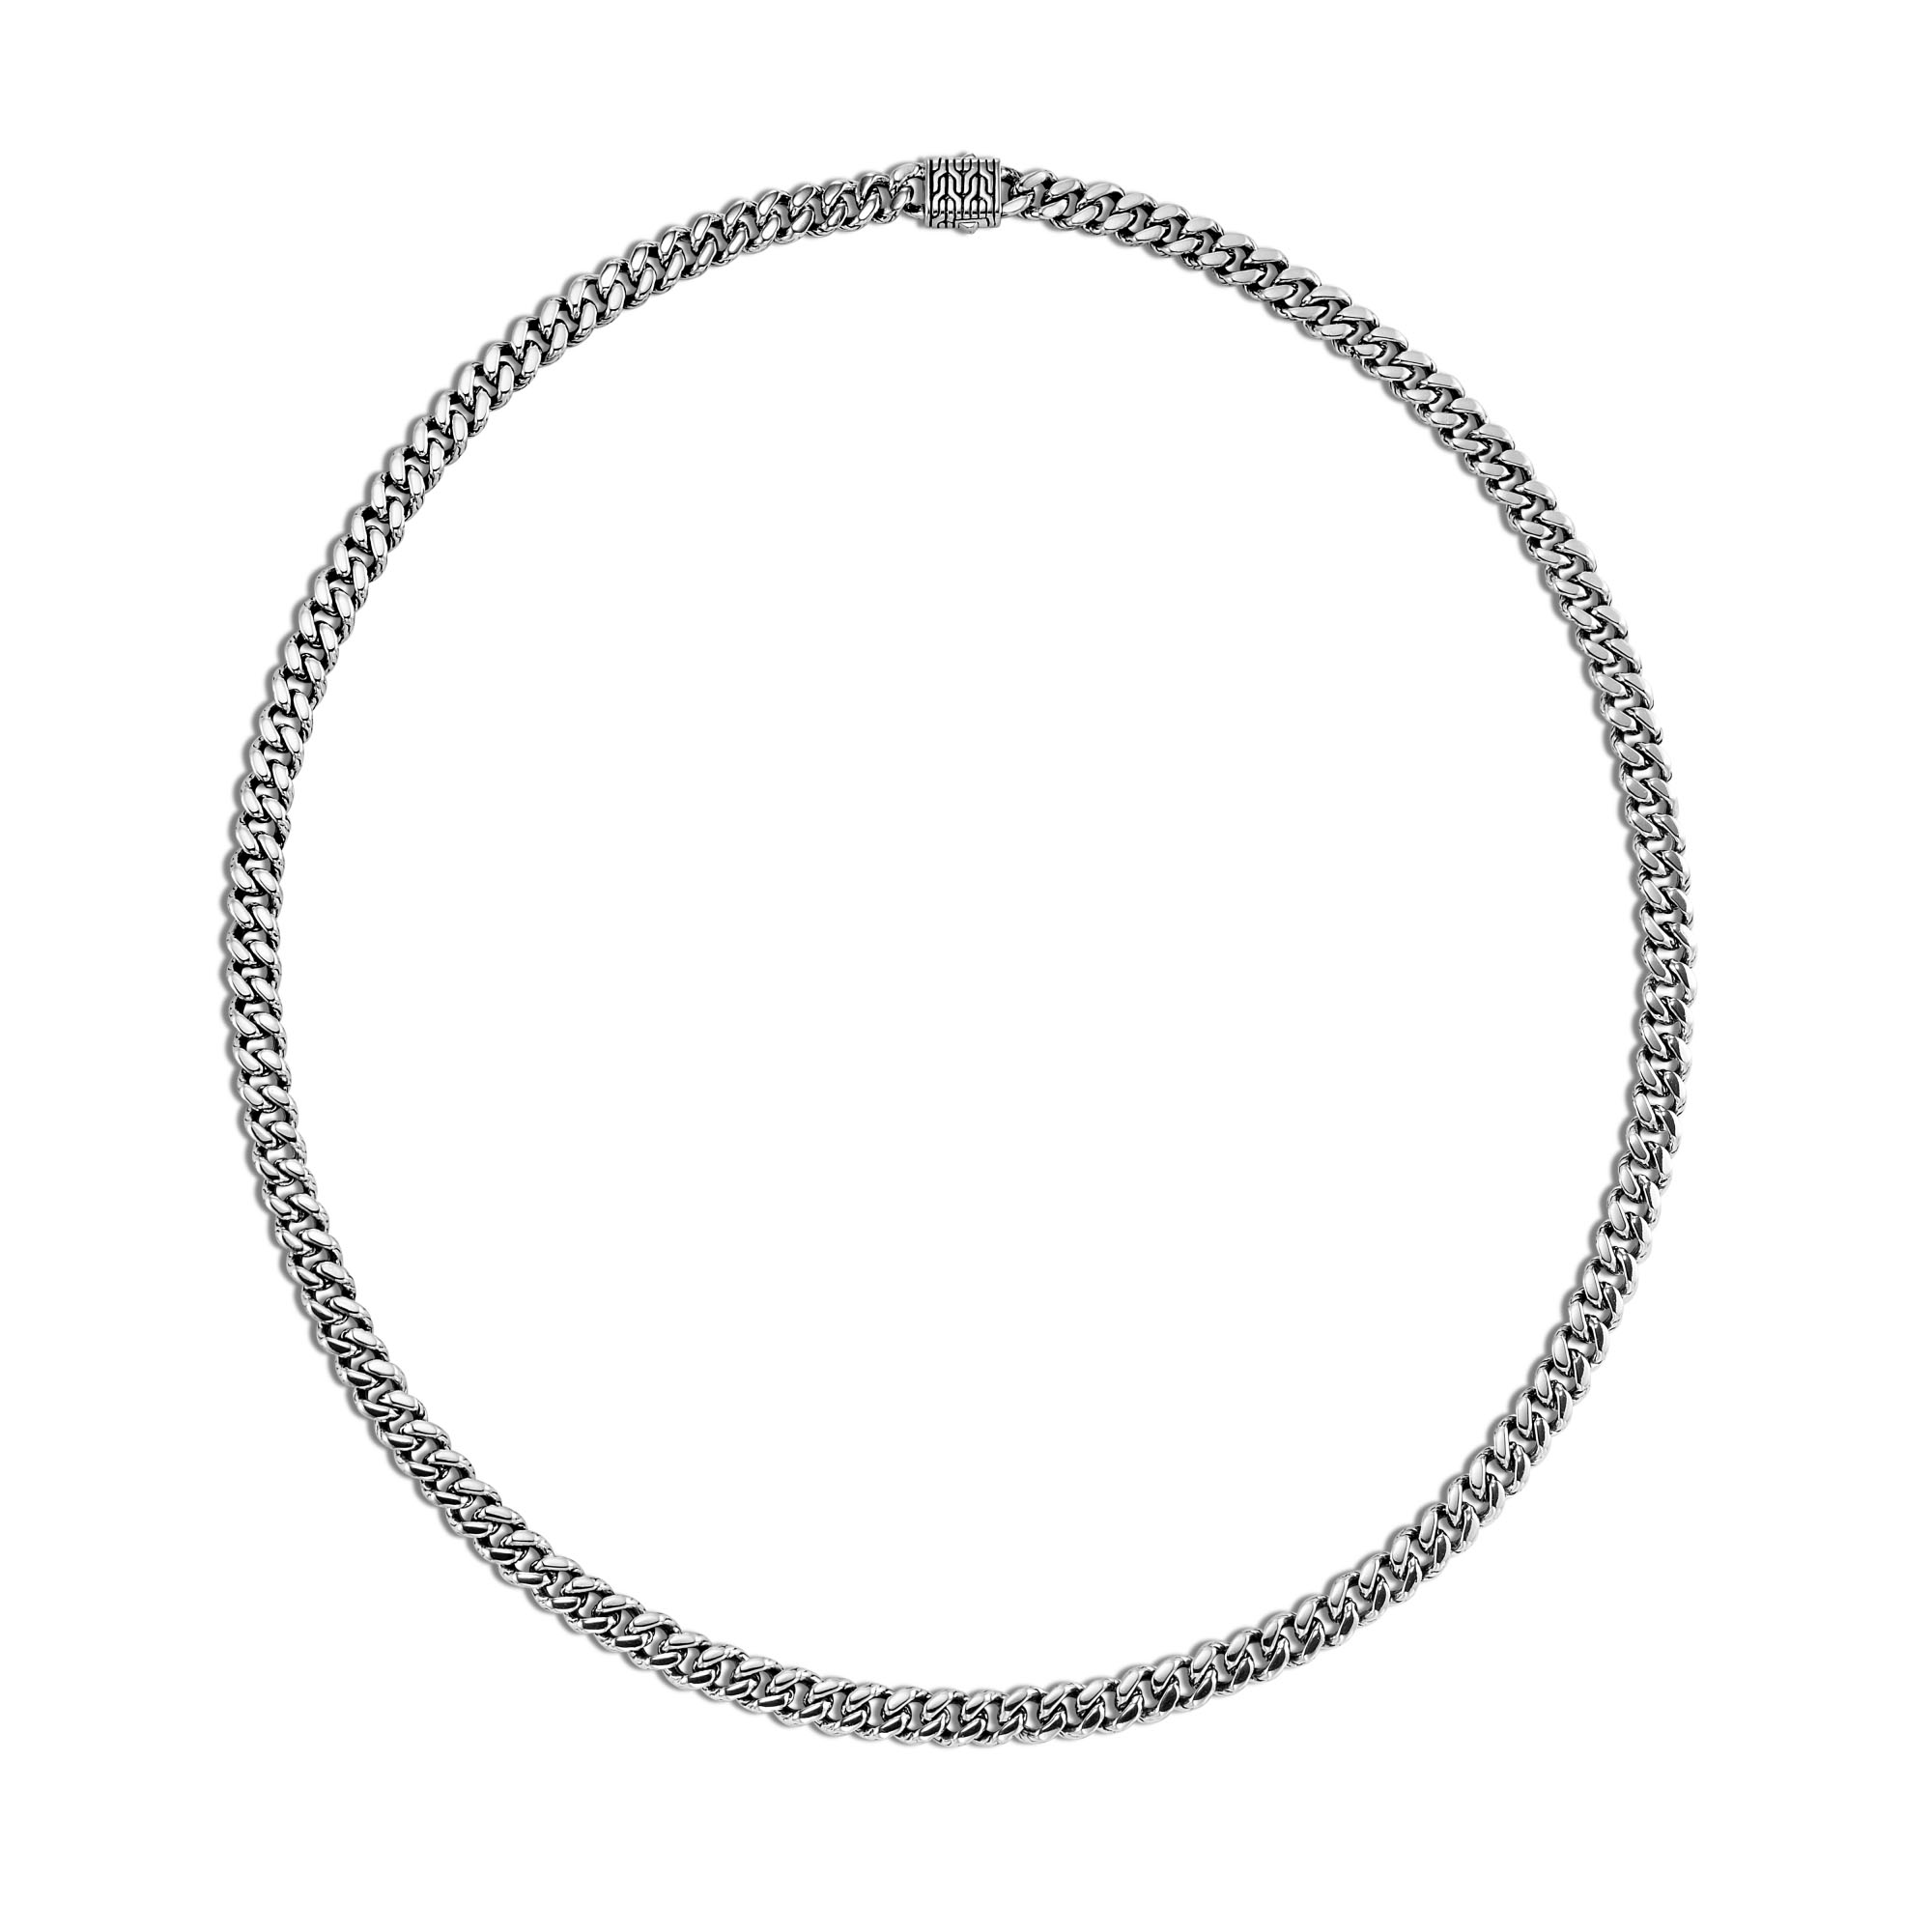 453892Classic-Chain-Curb-Link-Necklace.jpg